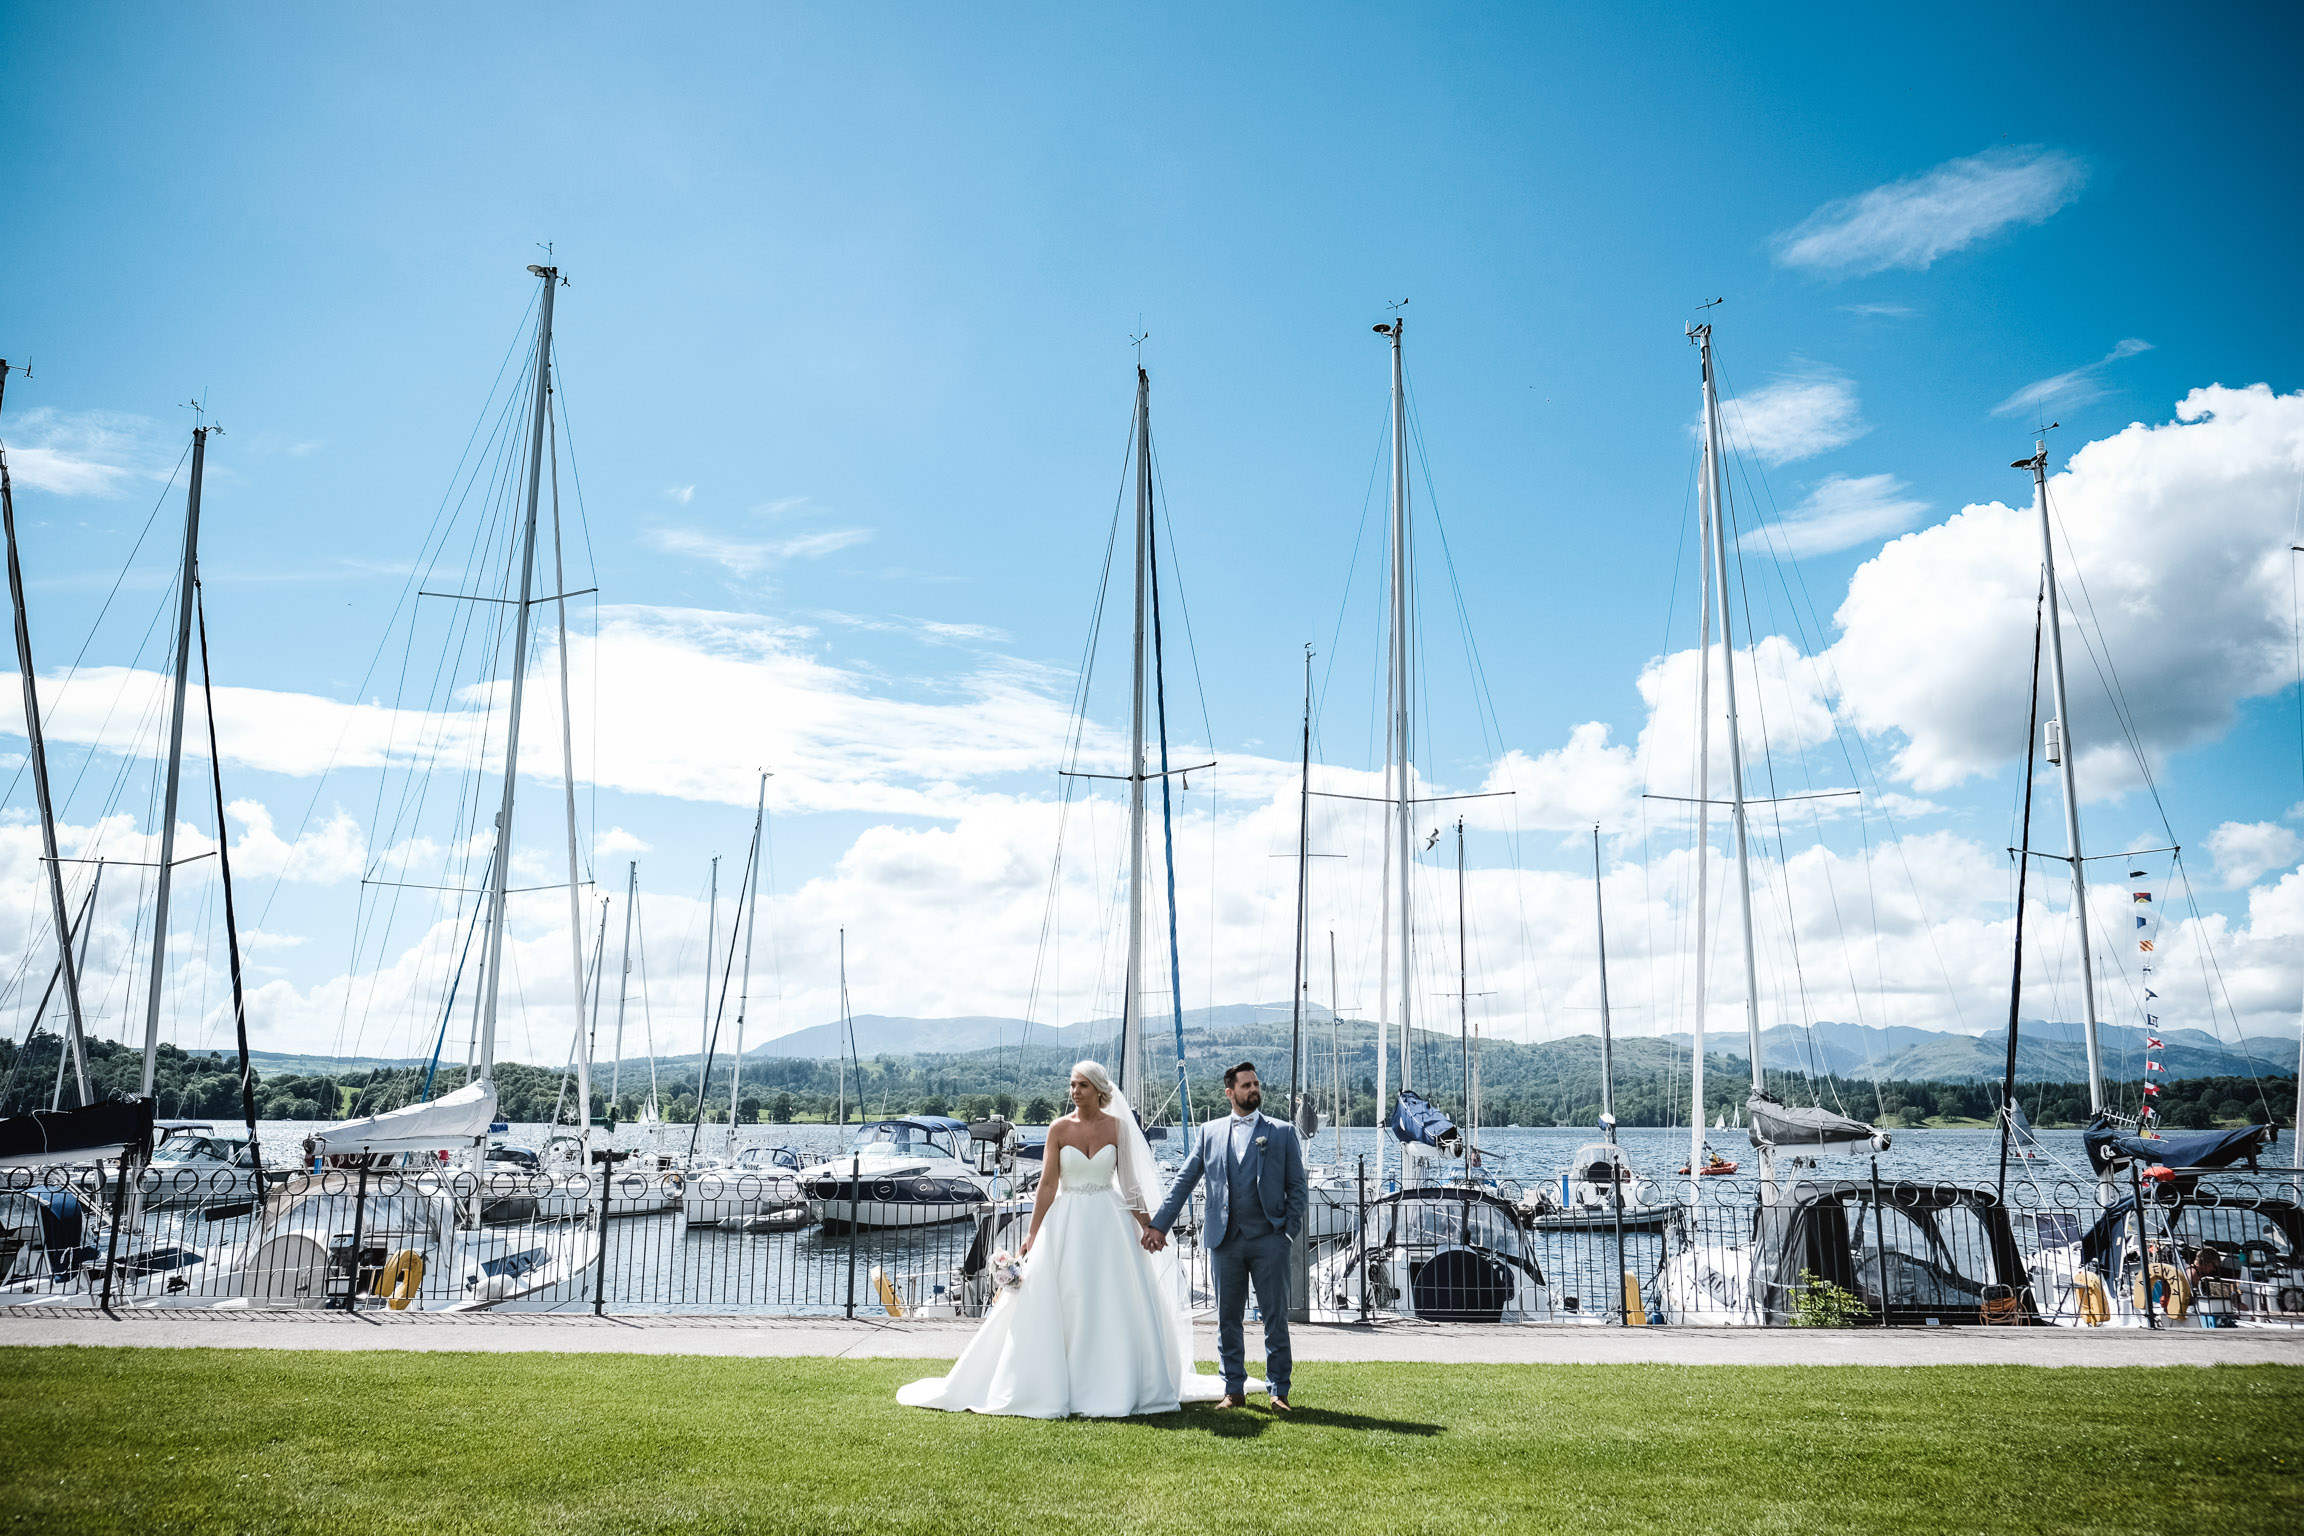 Low wood bay wedding photographer in widermere documentry wedding photography north west cumbria (63 of 131).jpg